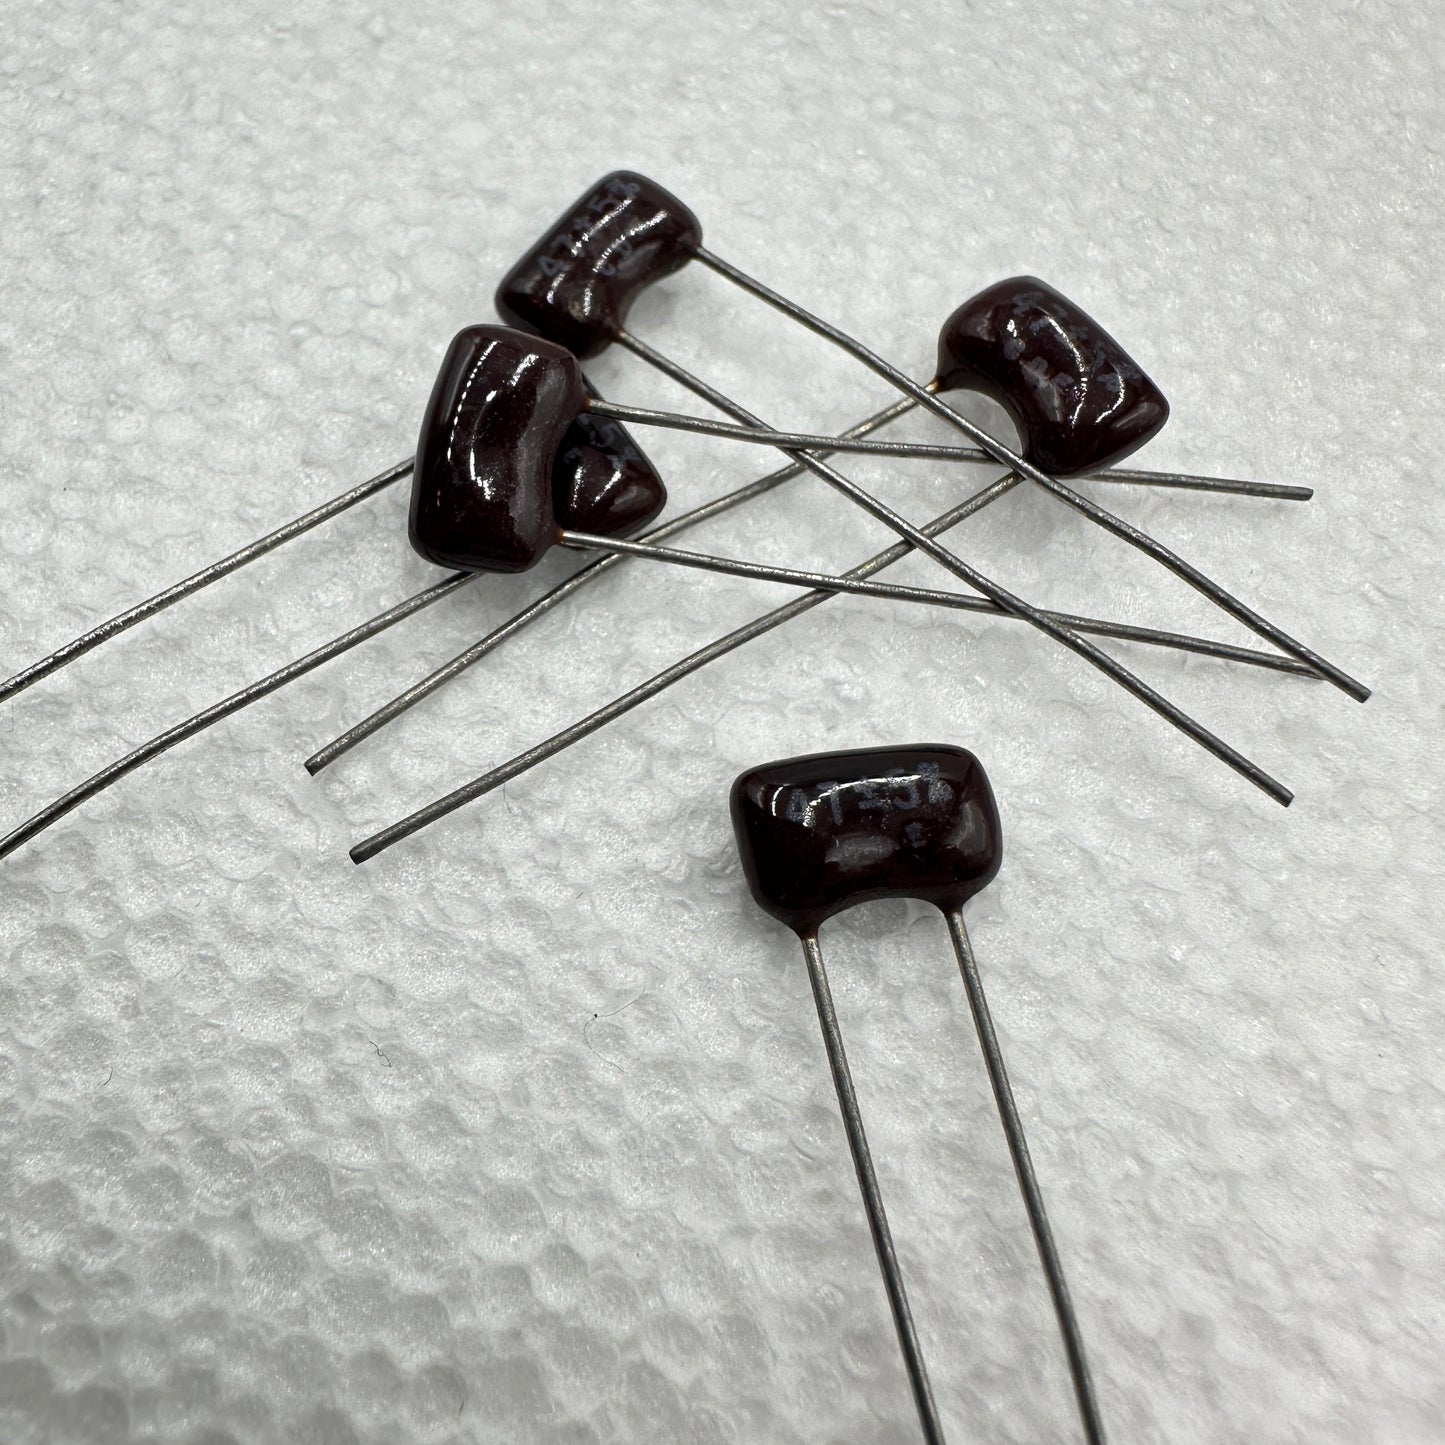 5 PACK 47pf 300v 5% Silver Mica Capacitors CDE .047nf